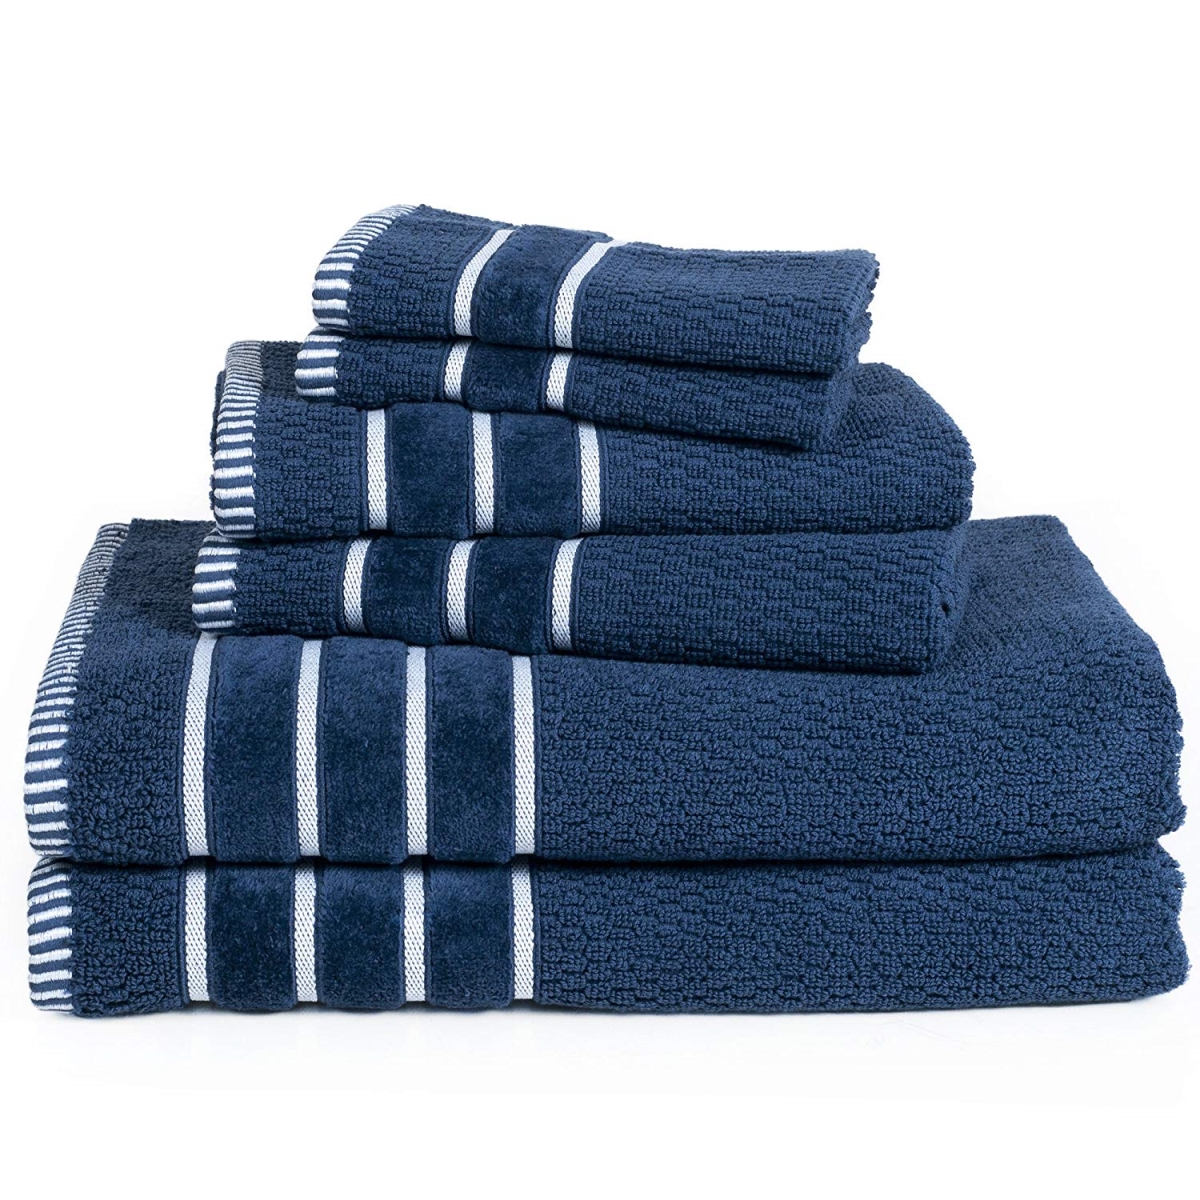 Picture of Bedford Home 67A-74186 Home 100 Percent Cotton Rice Weave 6 Piece Towel Set - Navy